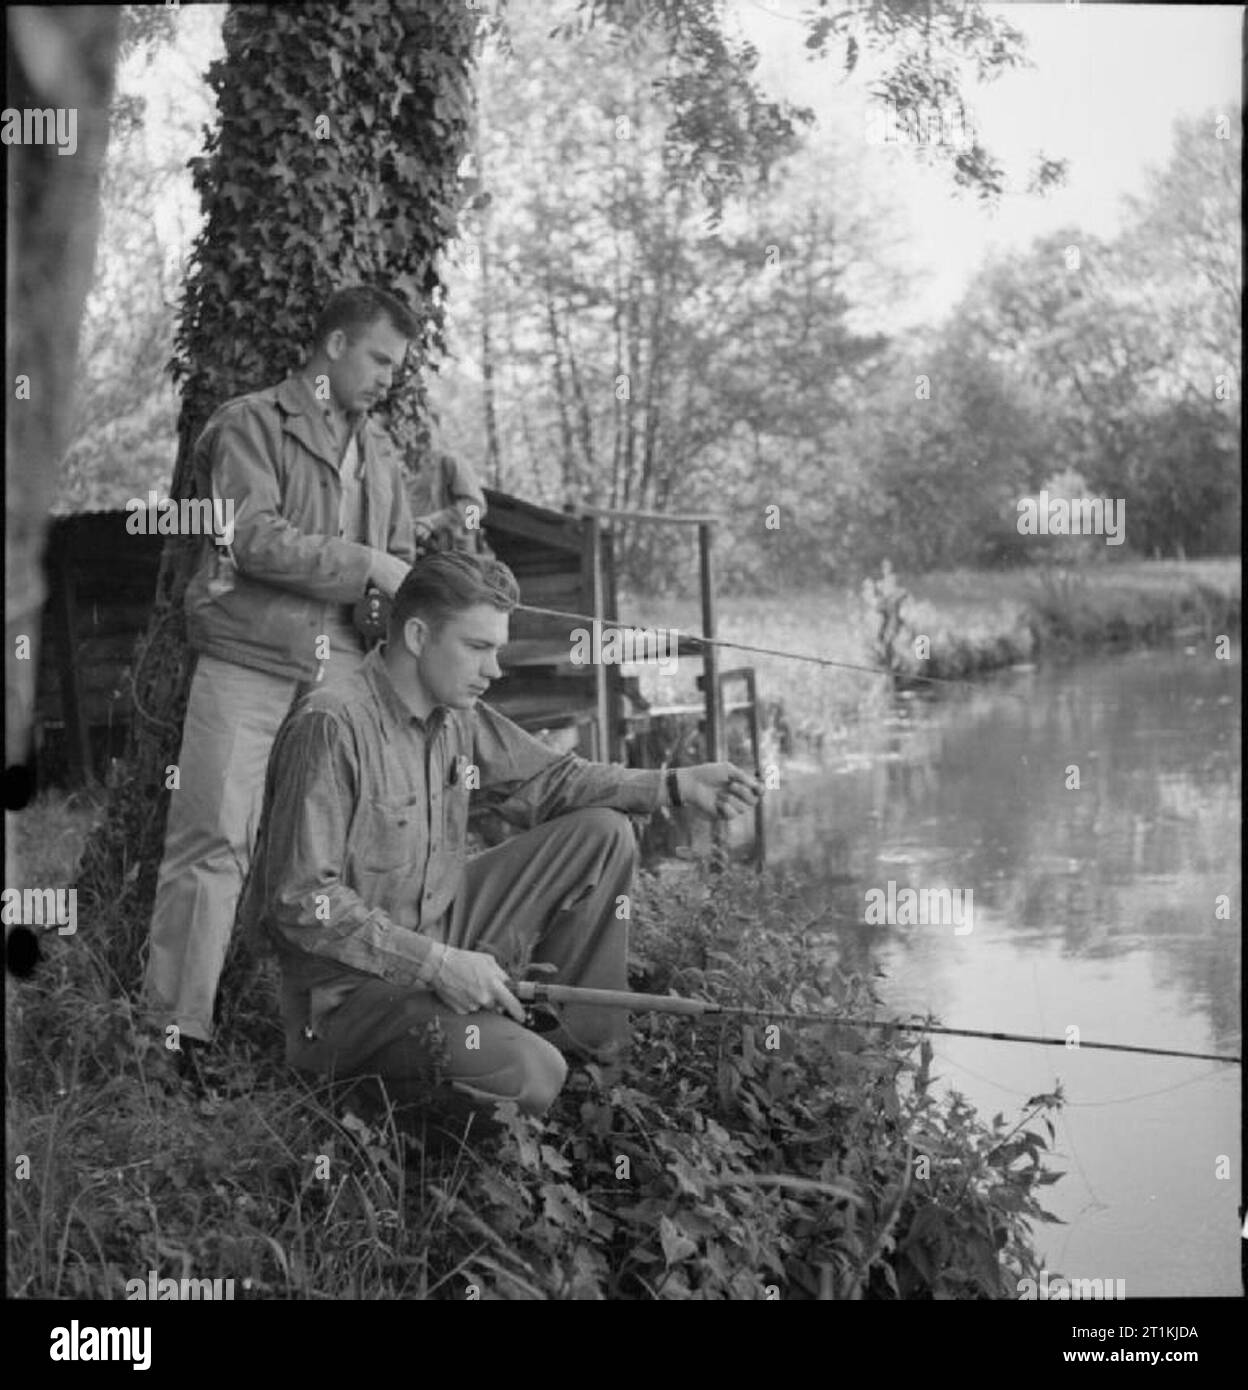 Country Club For US Airmen- Rest and Recuperation in the English Countryside, Stanbridge Earls, Romsey, Hampshire, 1943 Lieutenant J D Baird (standing) and Captain J R Bullock enjoy a spot of trout fishing on the banks of the River Test in Hampshire. Lieutenant Baird is the pilot of a 'Fort' (B17 Flying Fortress) from Suring, Wisconsin and Captain Bullock is a B17 navigator from Greensboro, North Carolina. According to the original caption: 'These fighters expected trout fishing to bore them, were genuinely surprised and pleased by the enjoyment it gave in spite of little success in the shape Stock Photo